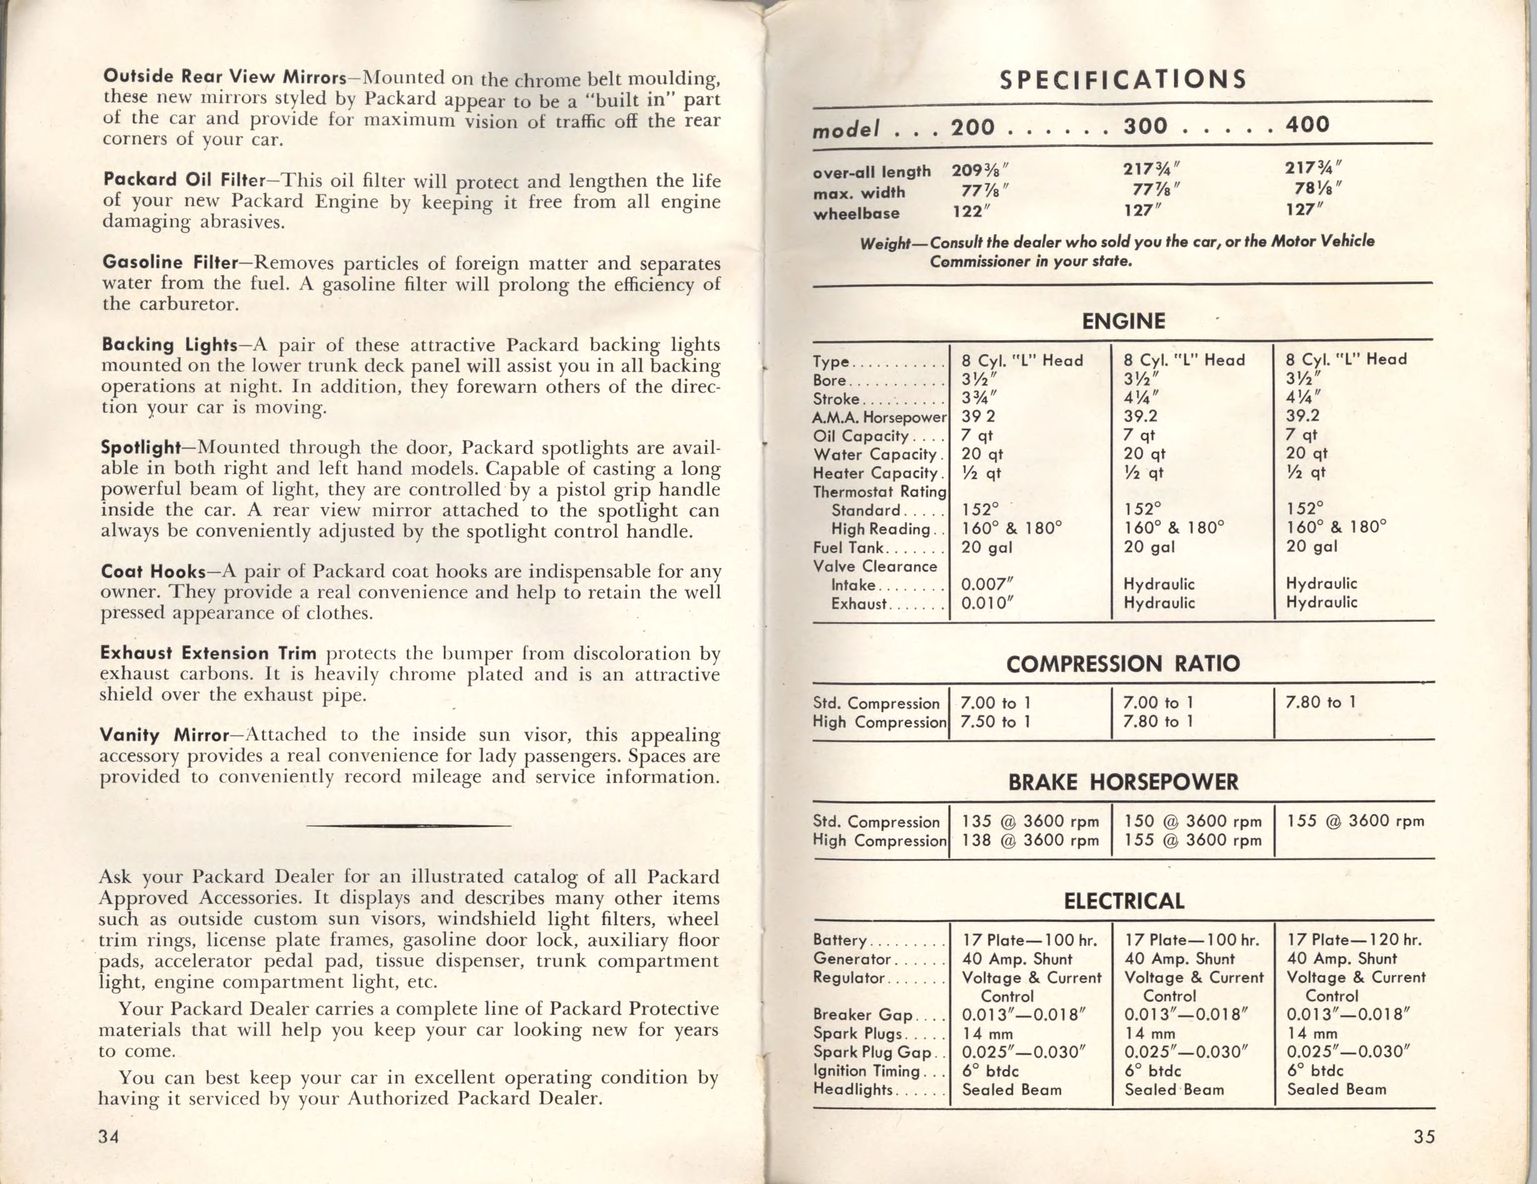 Directory Index: Packard/1951_Packard/1951_Packard_Owners_Manual